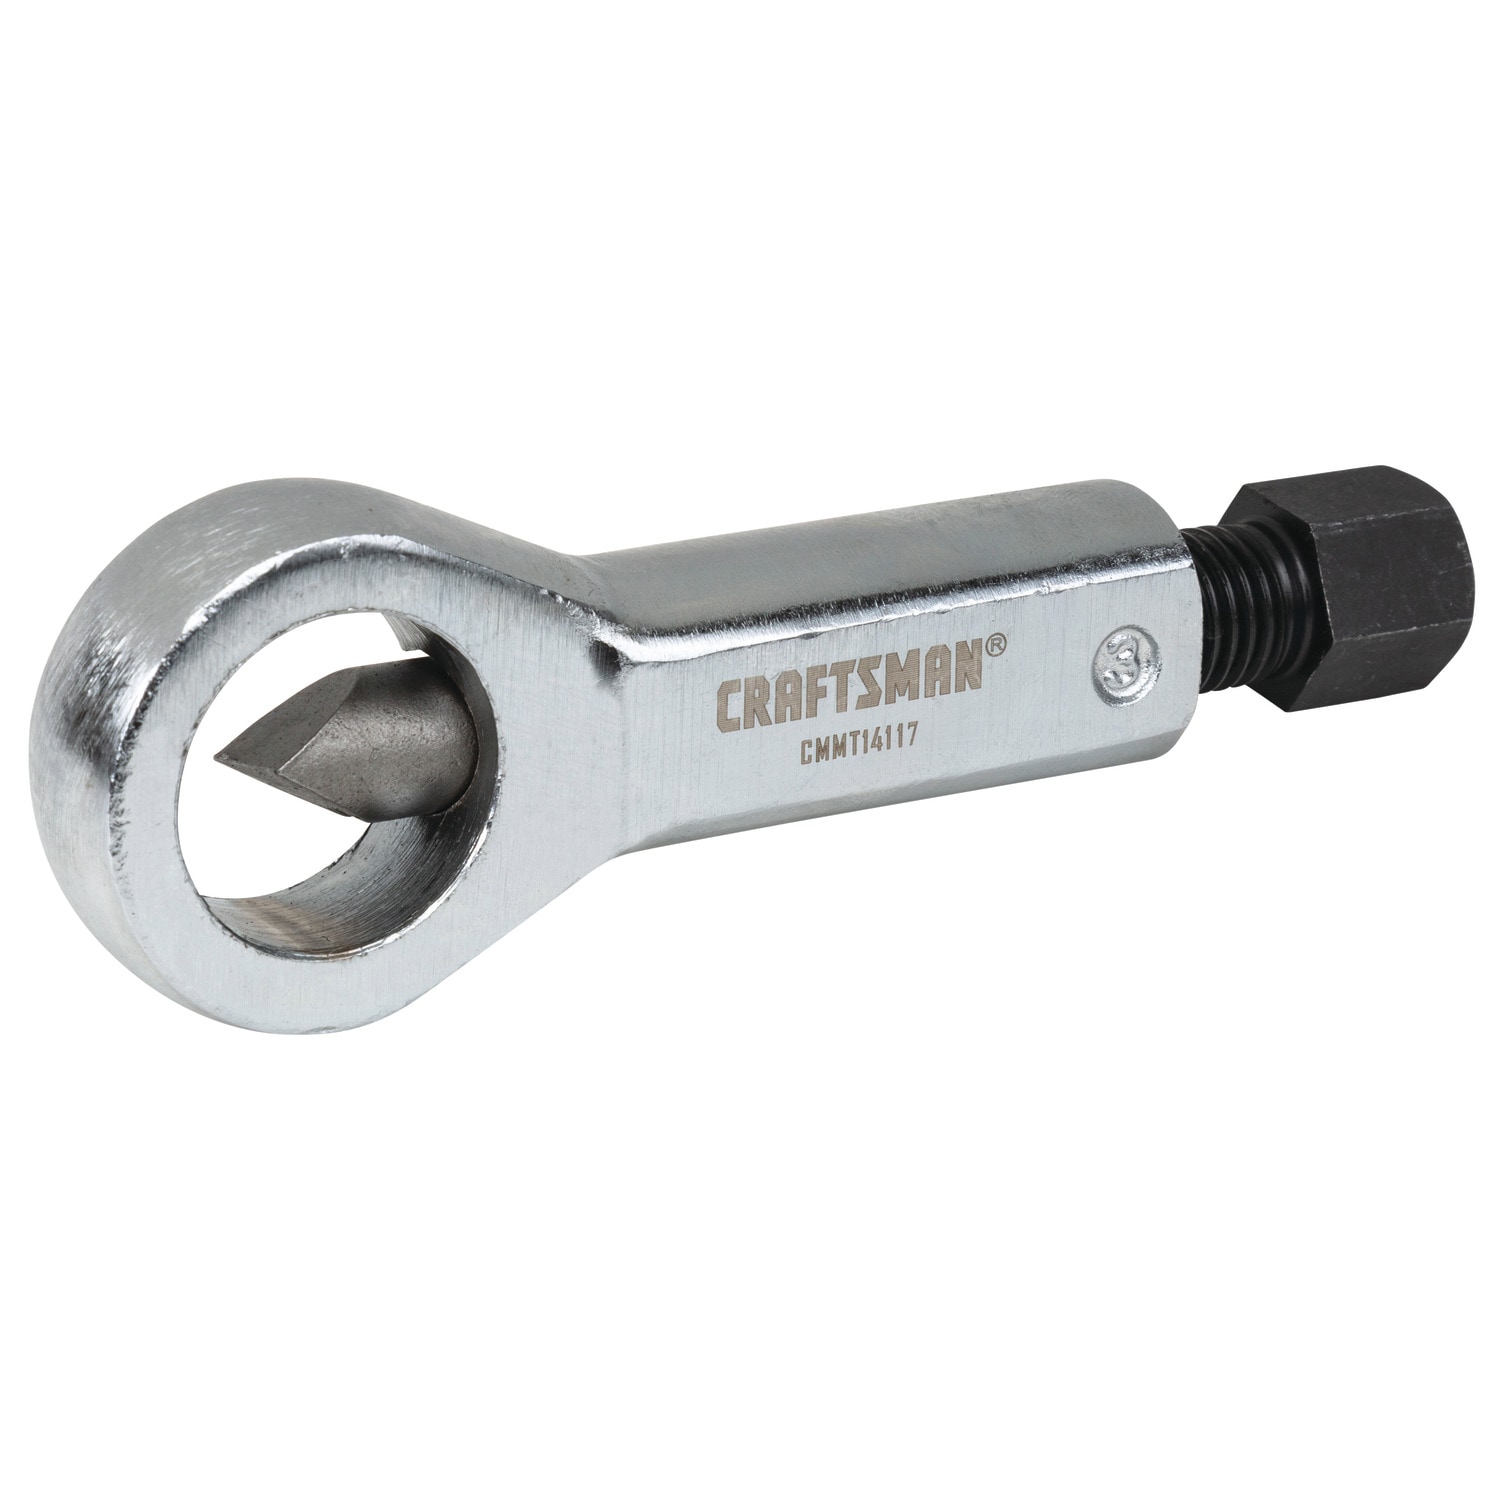 CRAFTSMAN Automotive Nut Cracker in the Automotive Hand Tools department at